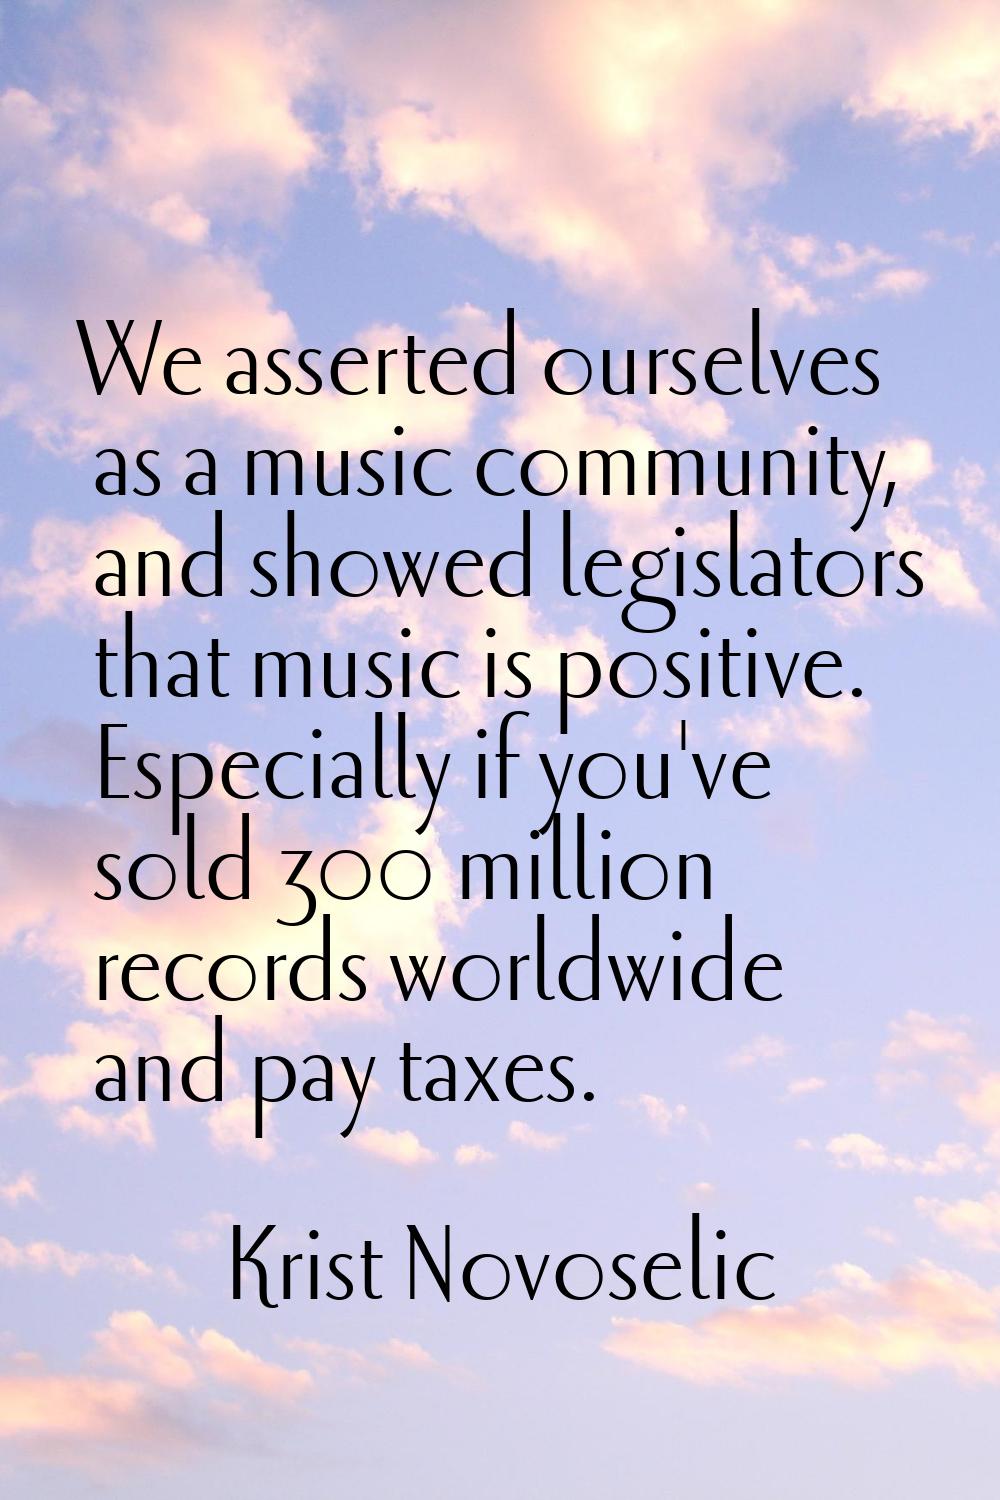 We asserted ourselves as a music community, and showed legislators that music is positive. Especial